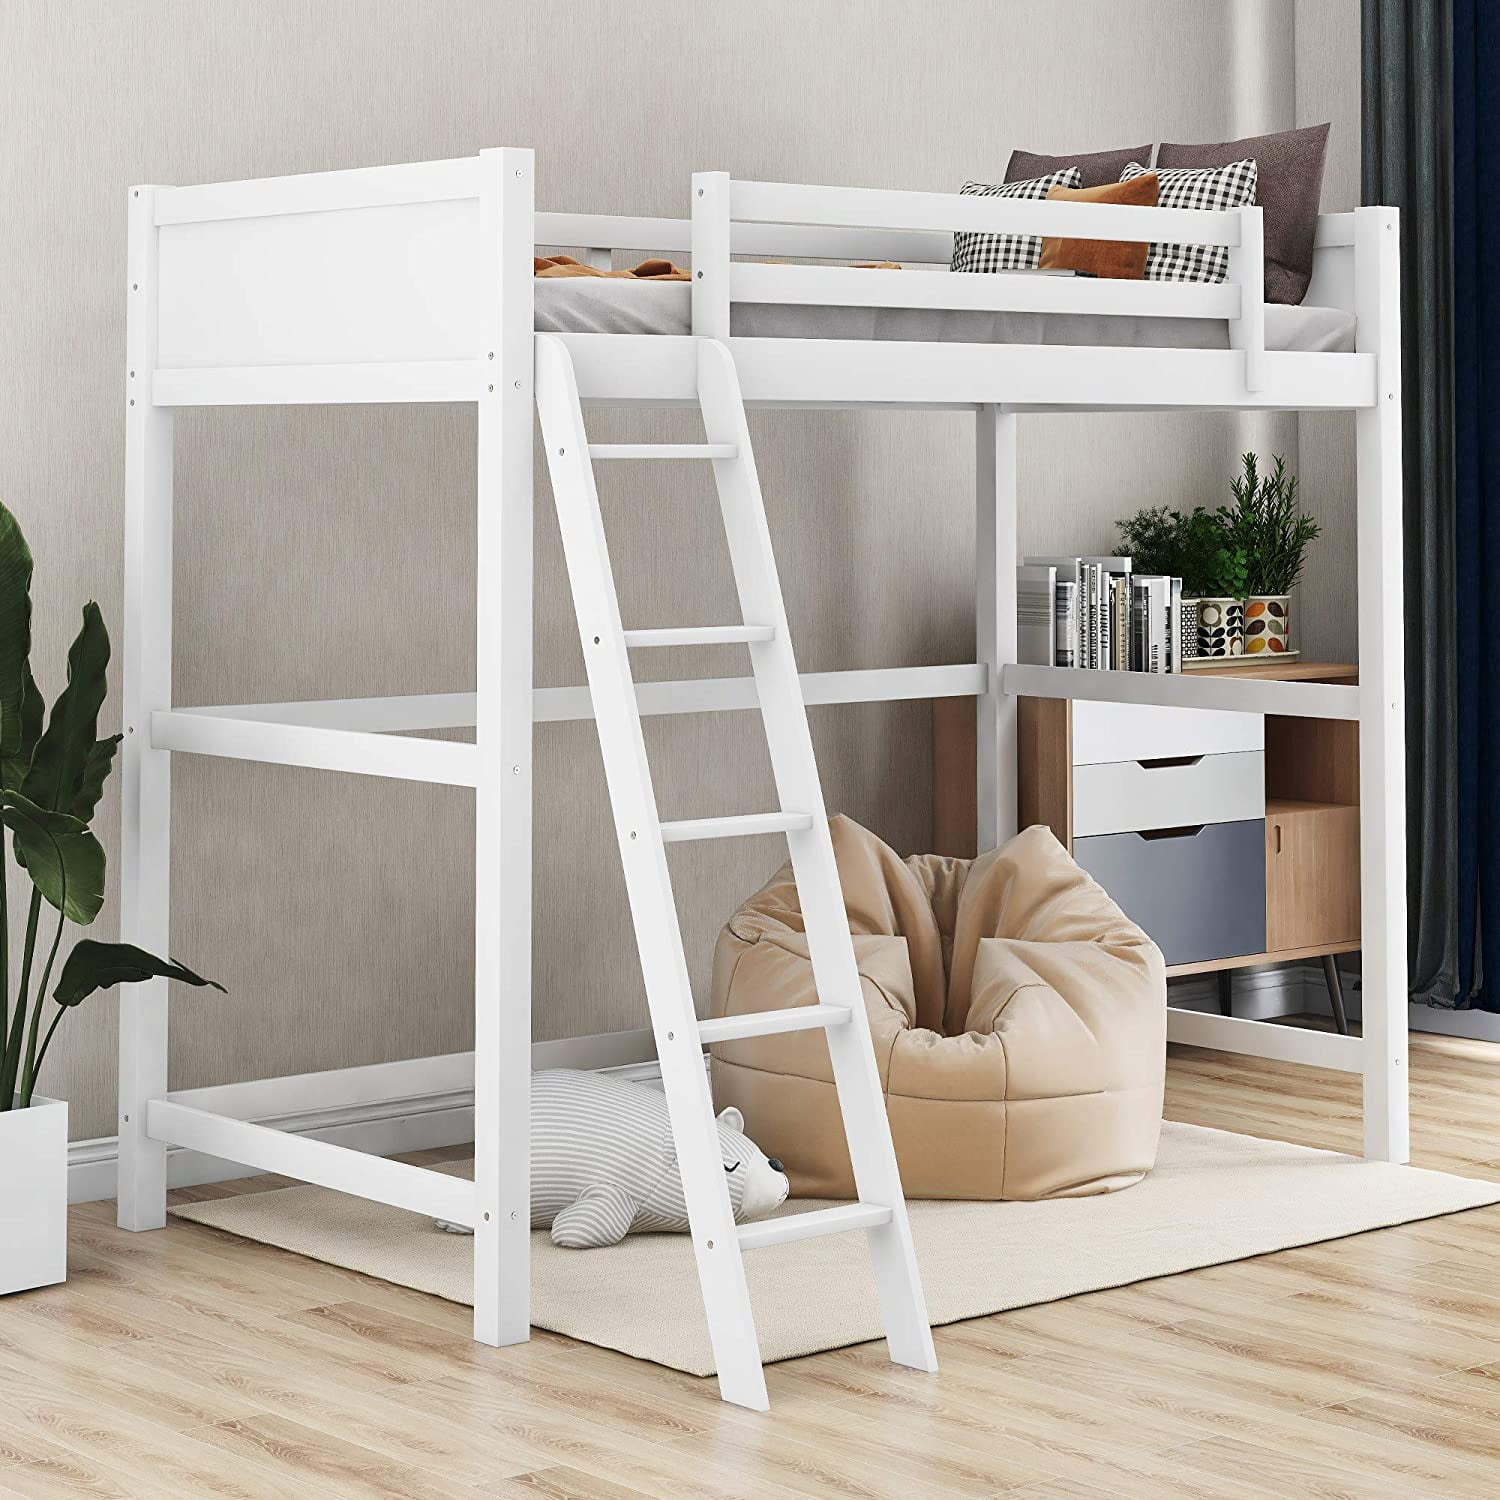 Modernluxe Panel Style Solid Wood Loft, Wood Bunk Bed Ladder Only